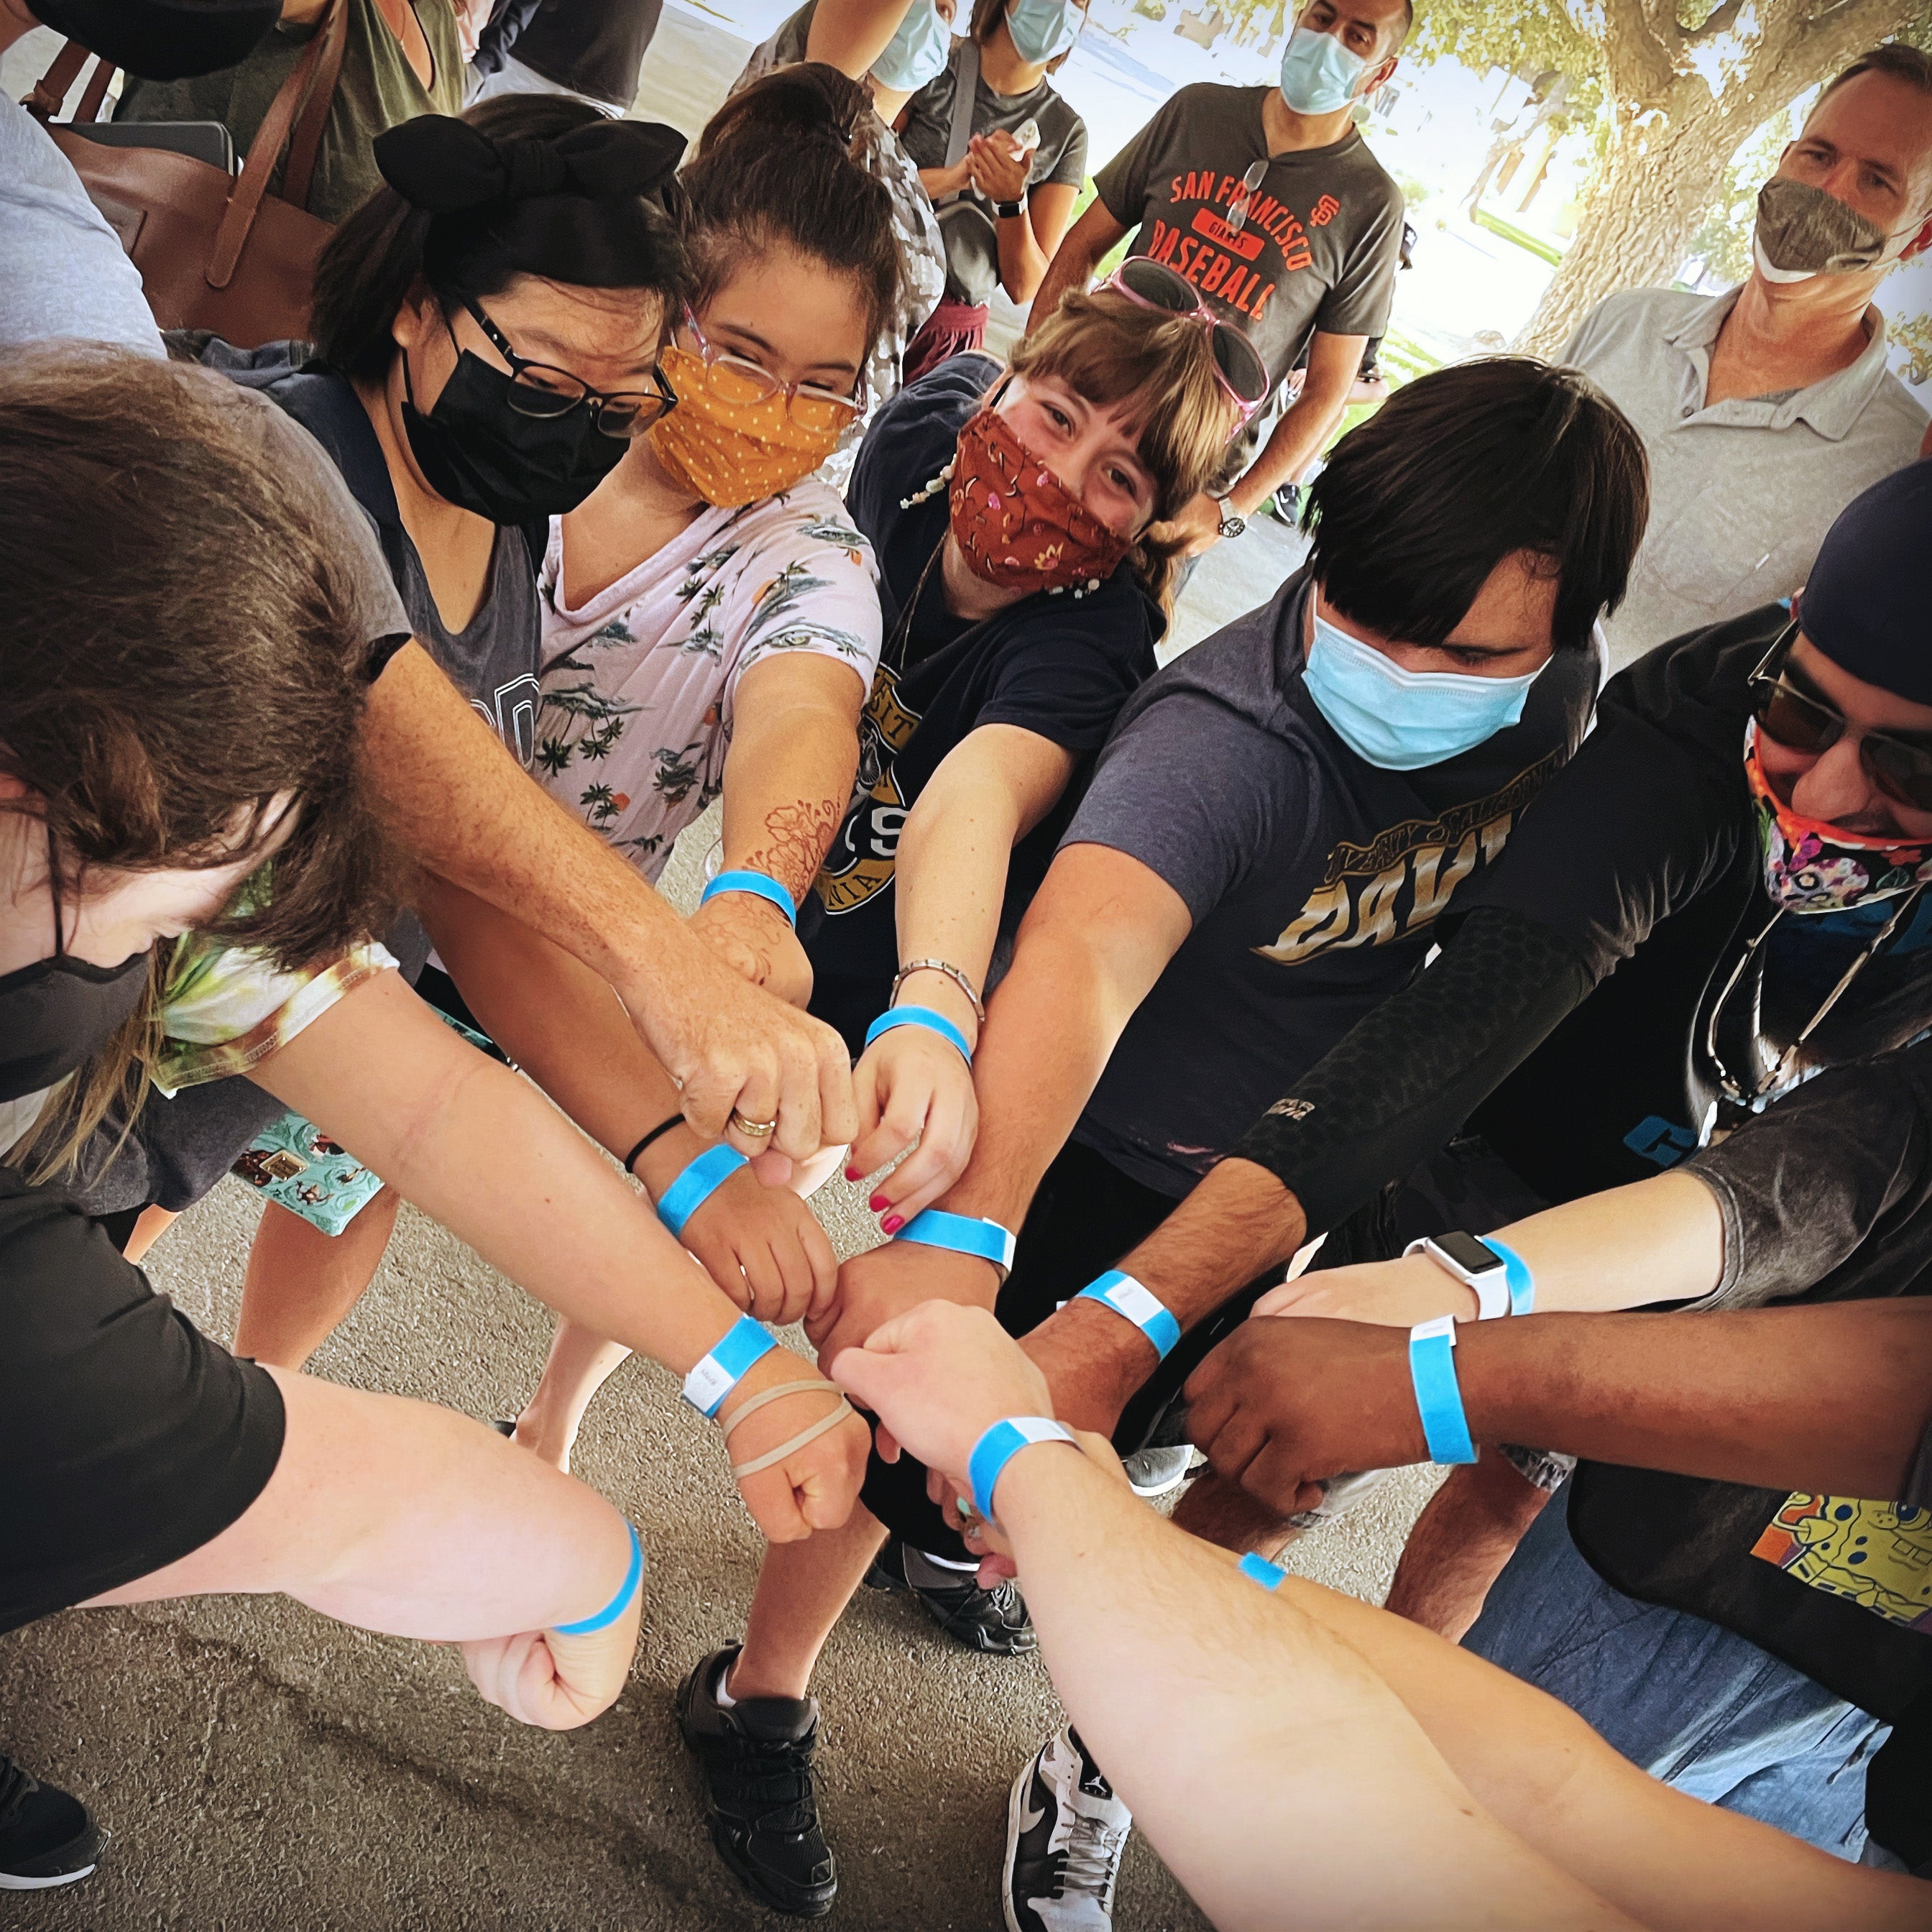 A group of people reach their hands into the center of a the circle and show off blue wristbands